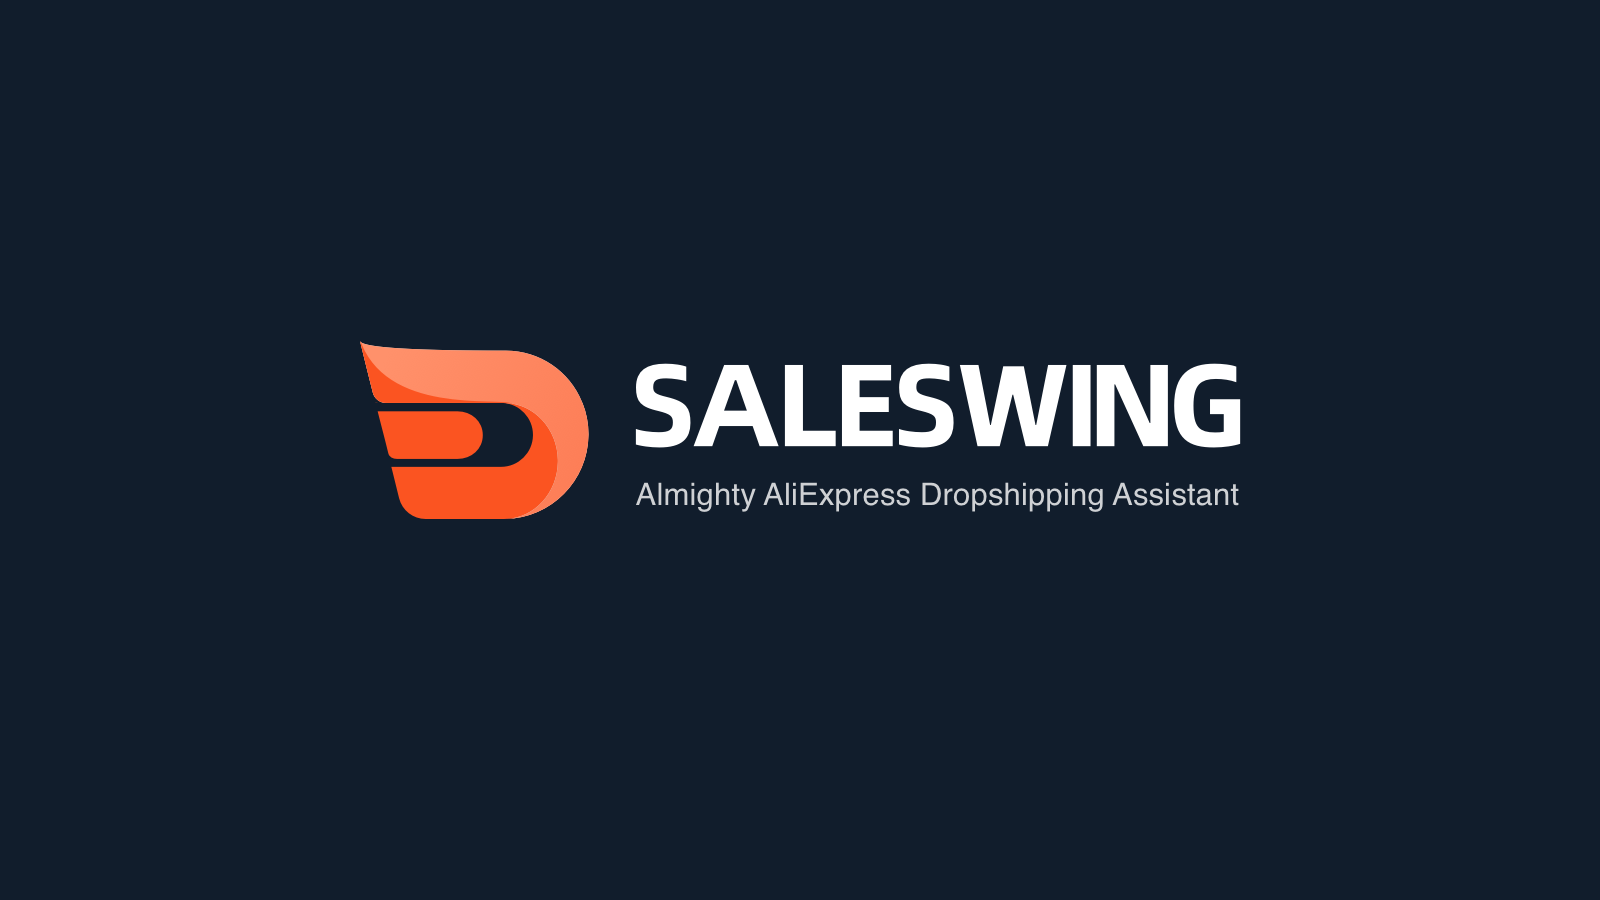 SALESWING - Almighty AliExpress dropshipping assistant